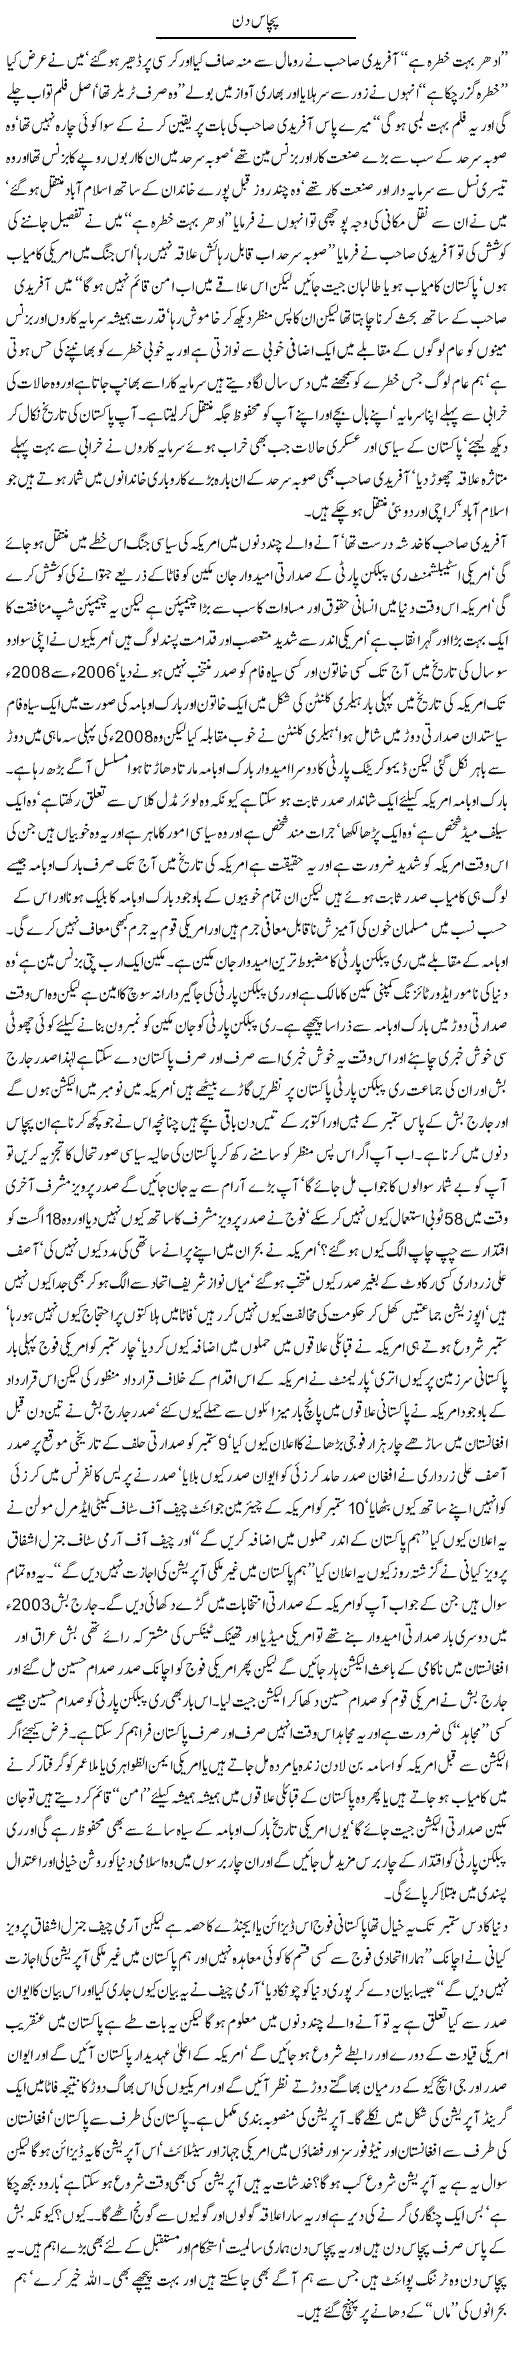 Pachas Din by Javed Chaudhry